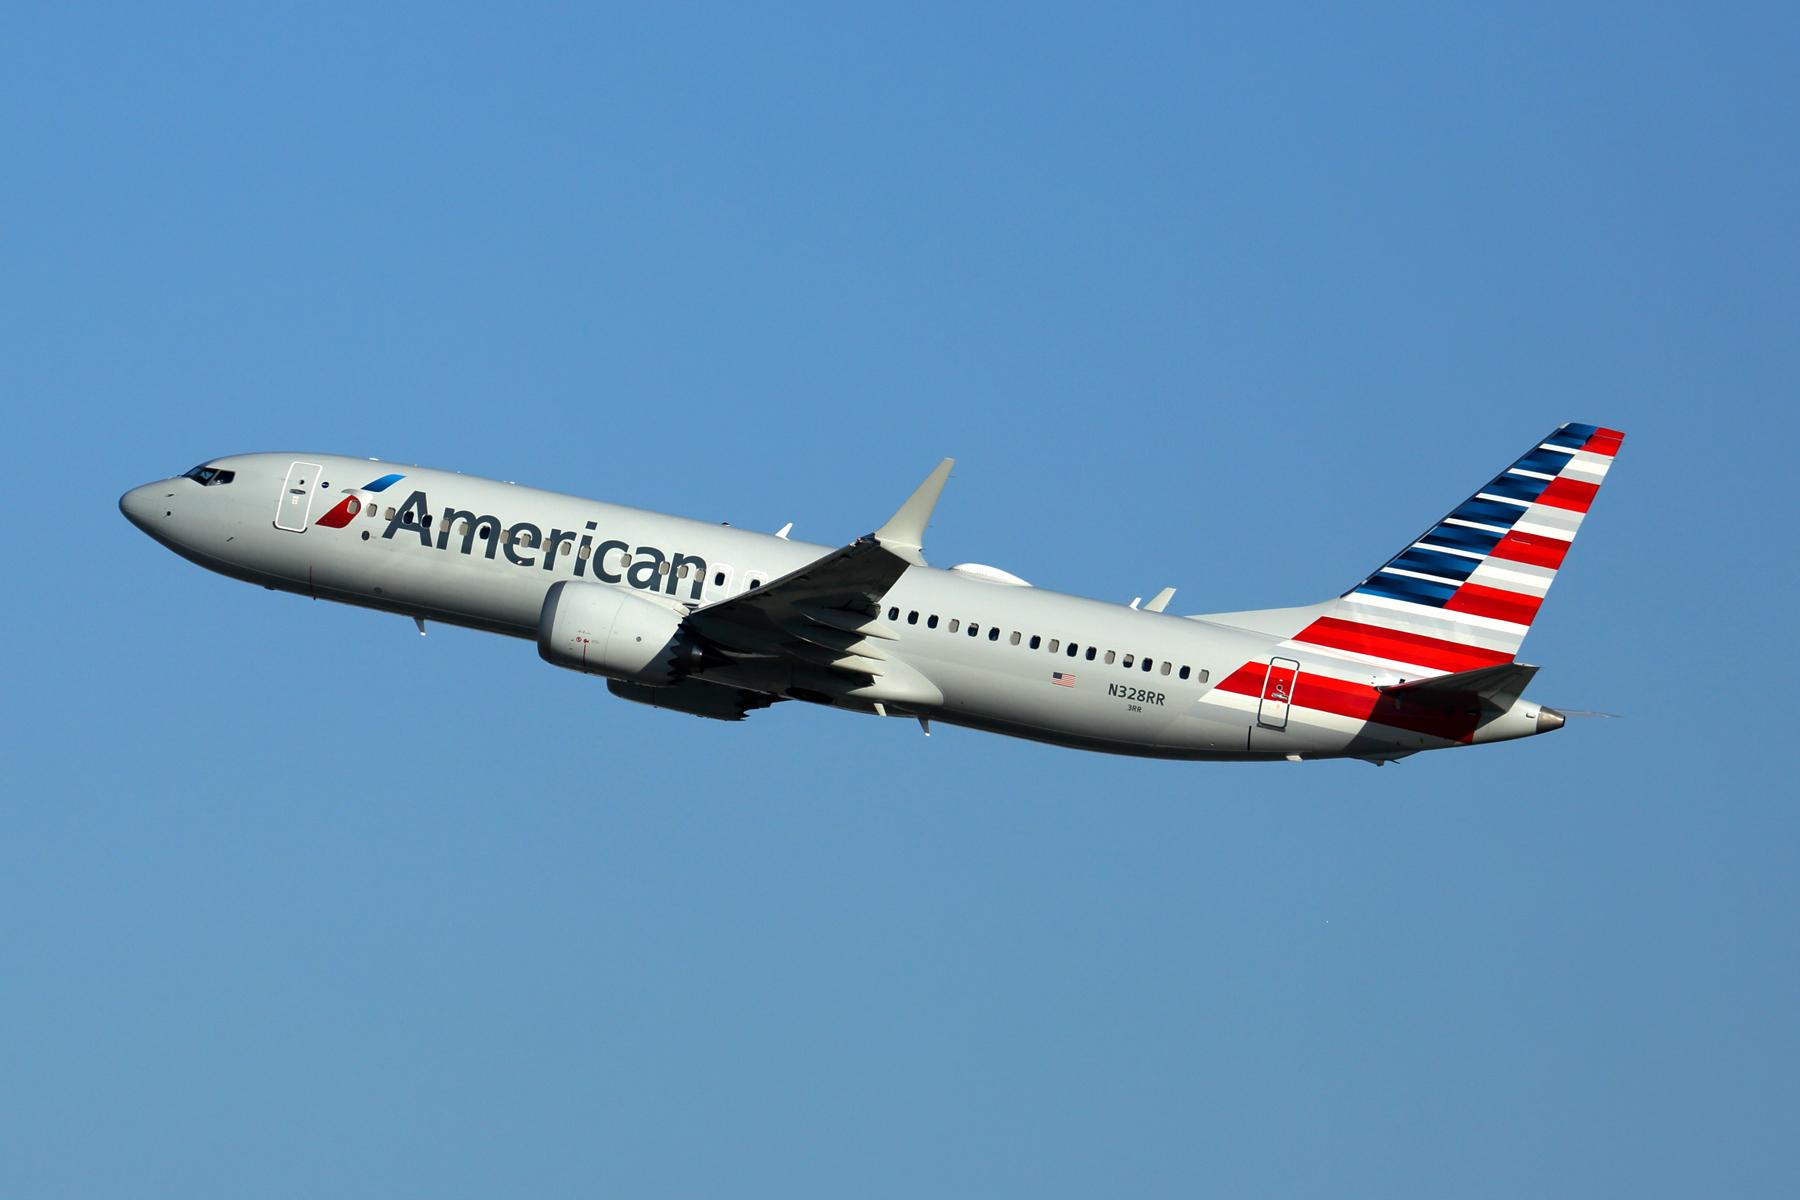 American Airlines Boeing 737 MAX 8